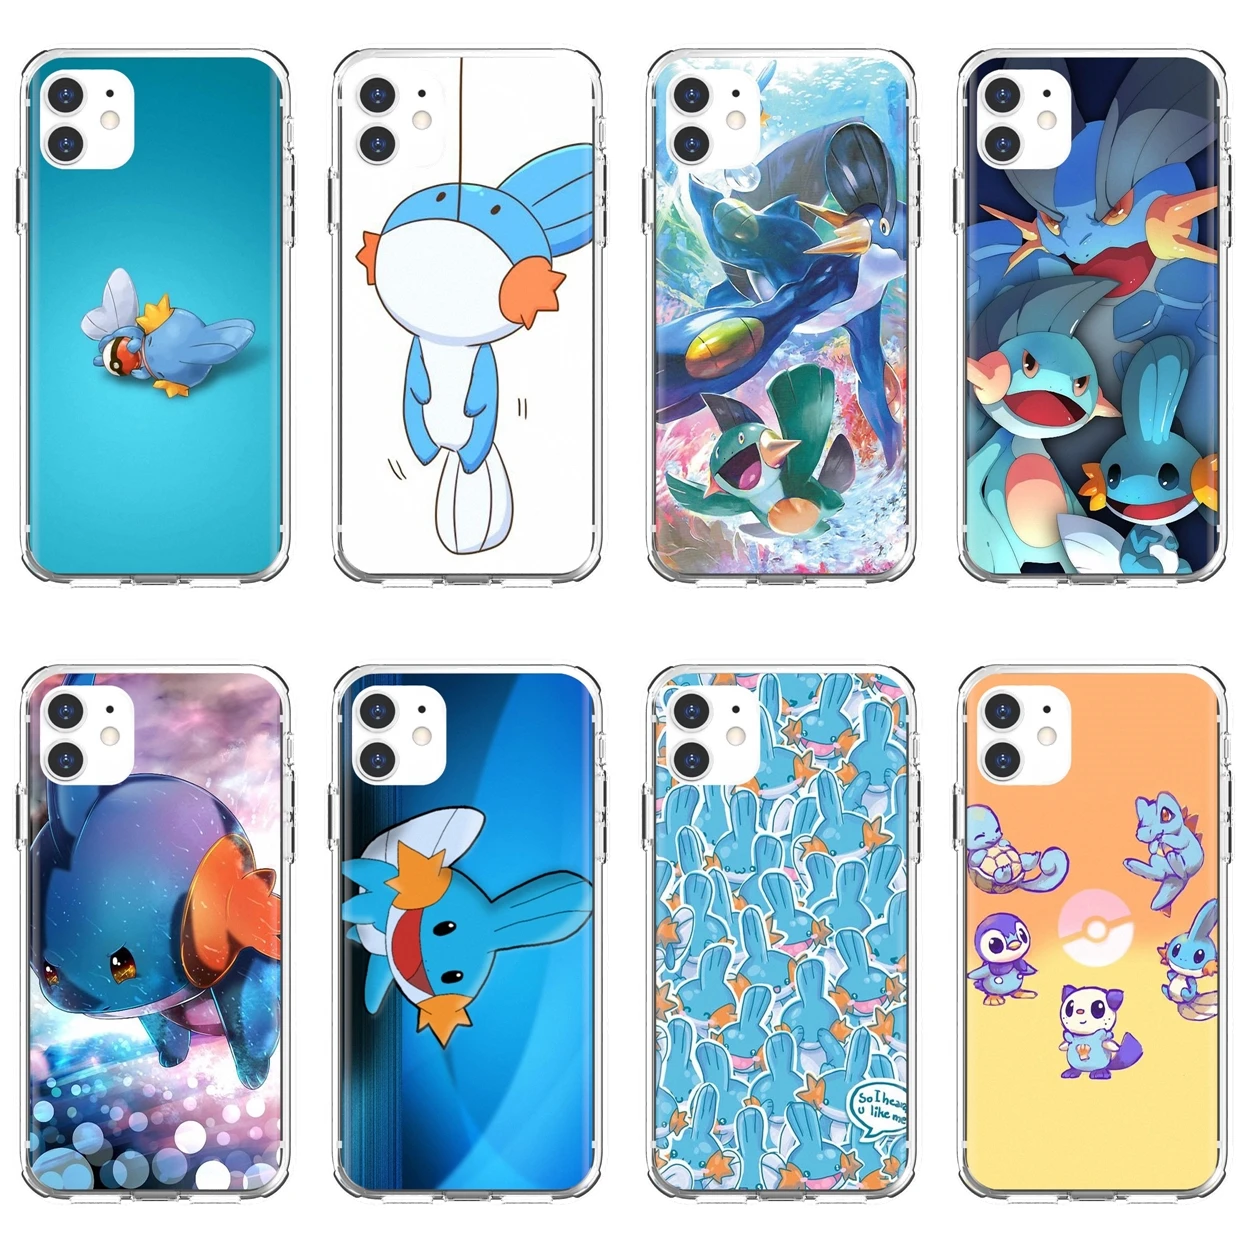 TPU Cases Covers For Xiaomi Redmi Note 10 10s 3S 4 4X 5 6 6A 7 8  8T 7A 9 9T 9s 9C 9A Pro Anime Cartoon Mudkip Charmander Art